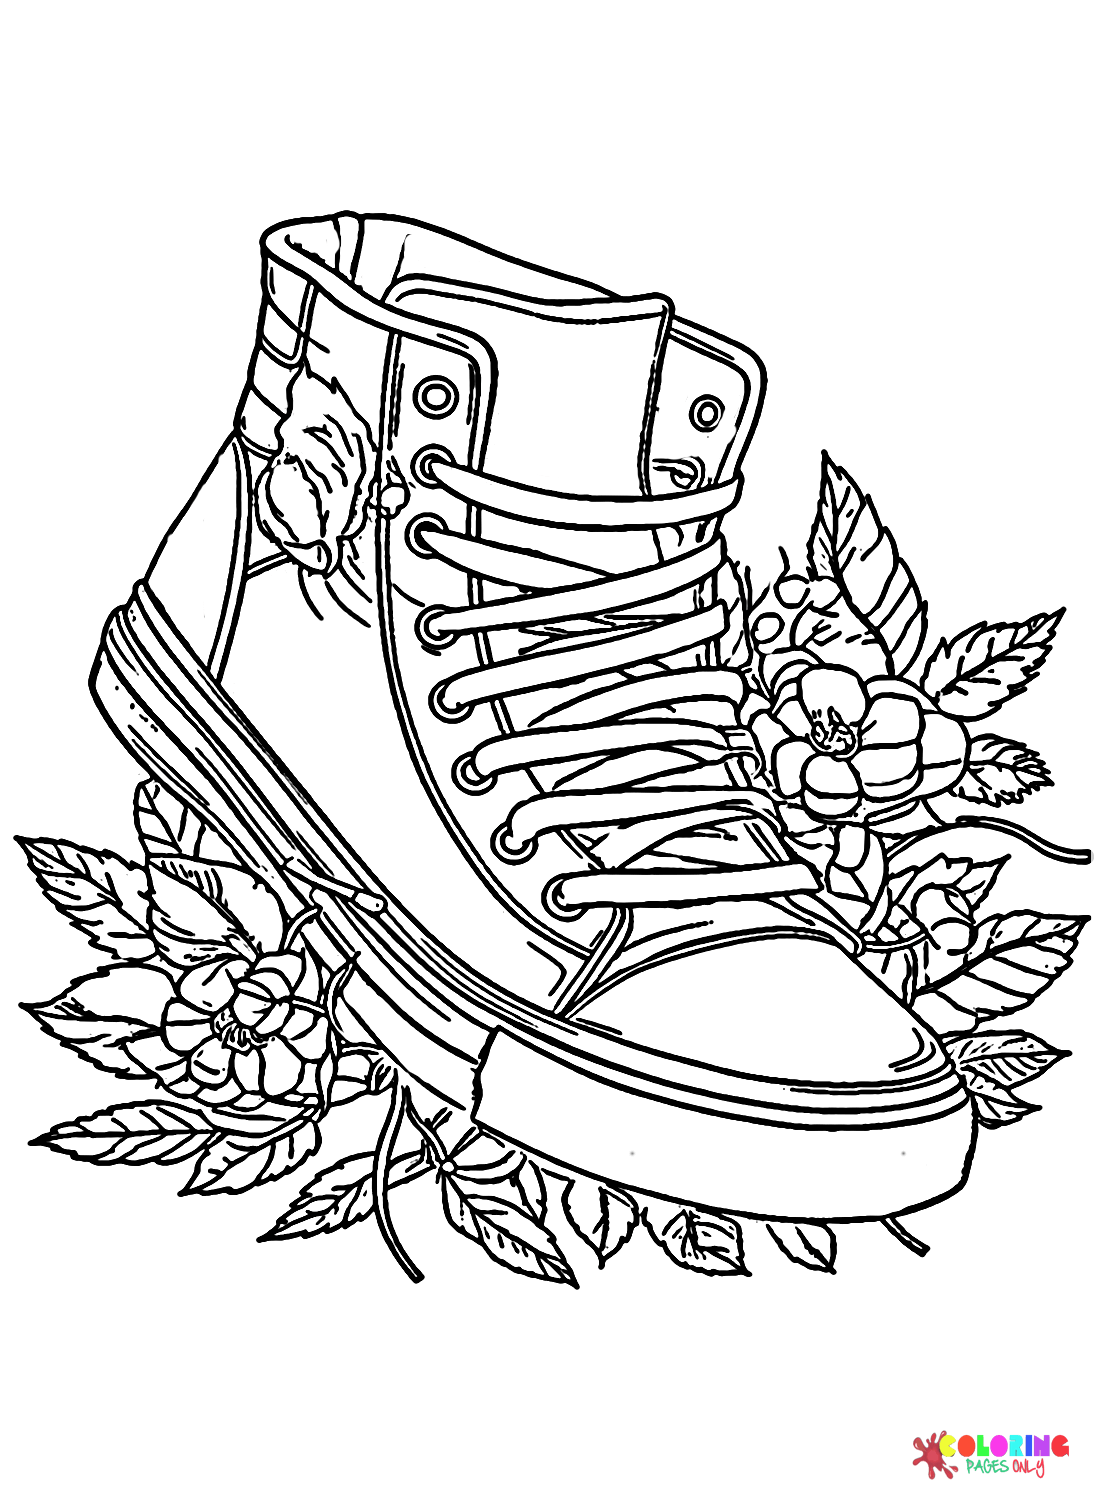 Sneaker Coloring Pages - Coloring Pages For Kids And Adults